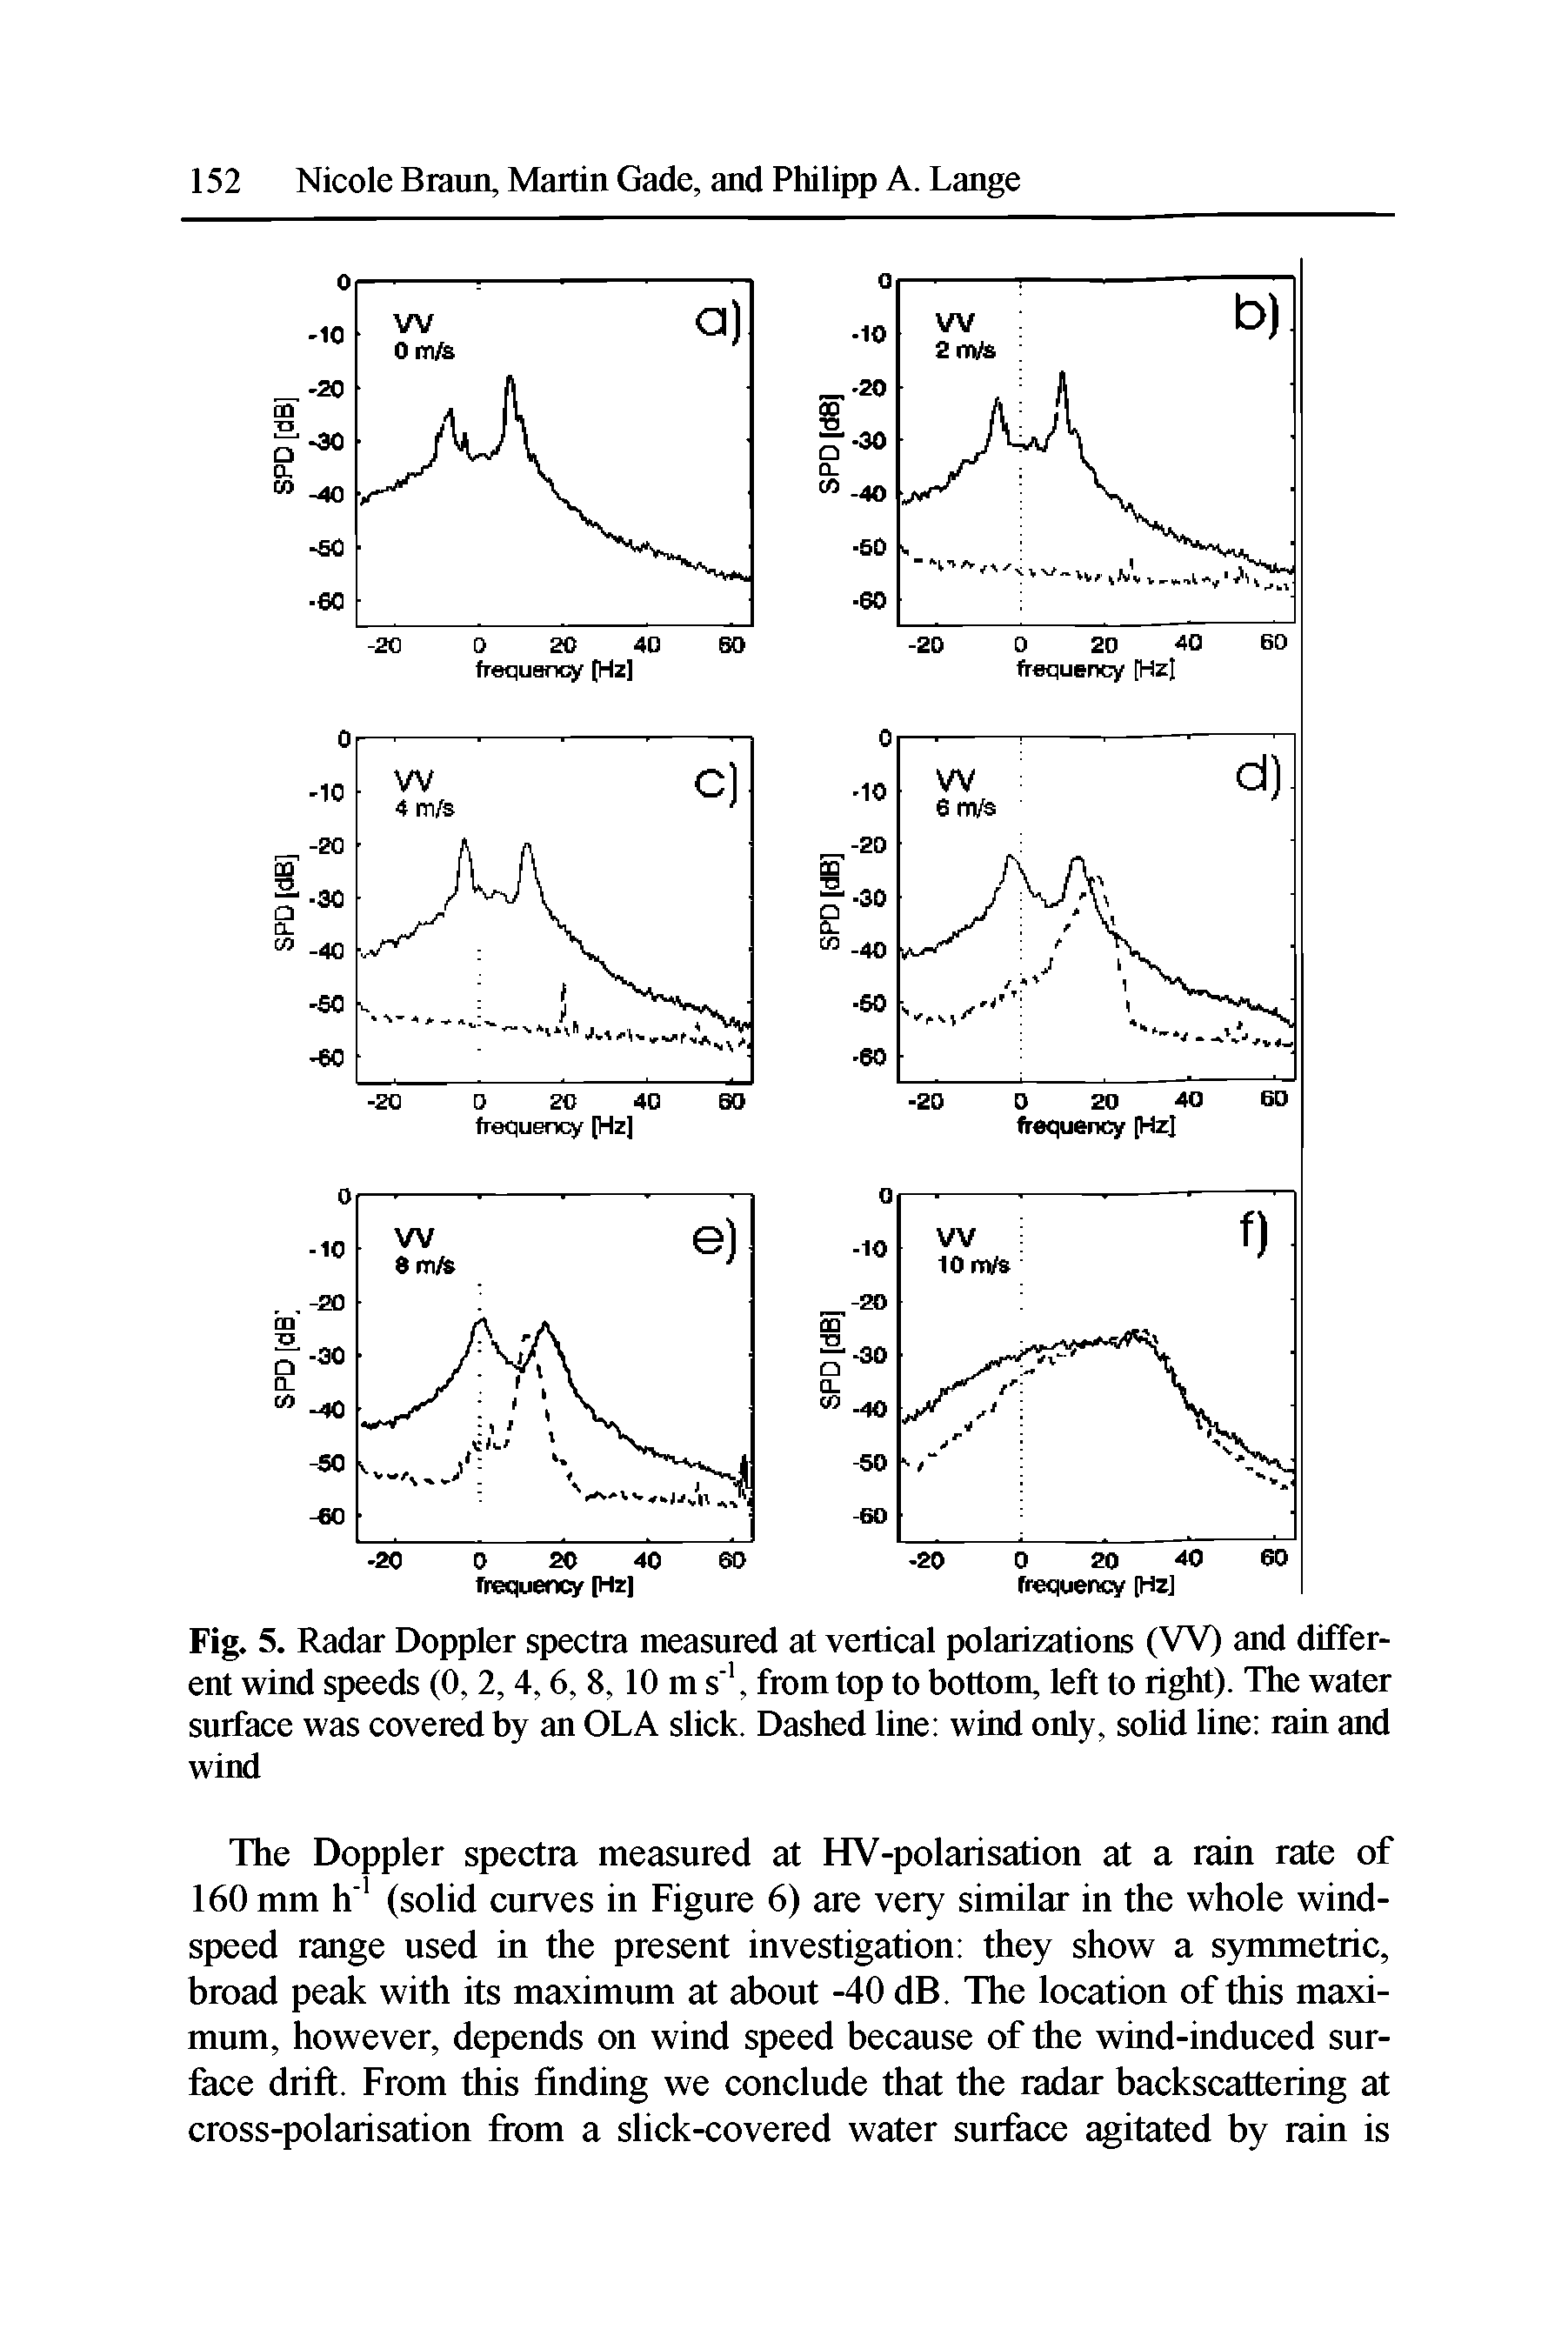 Fig. 5. Radar Doppler spectra measured at vertical polarizations (W) and different wind speeds (0, 2, 4,6, 8, 10 m s 1, from top to bottom, left to right). The water surface was covered by an OLA slick. Dashed line wind only, solid line rain and wind...